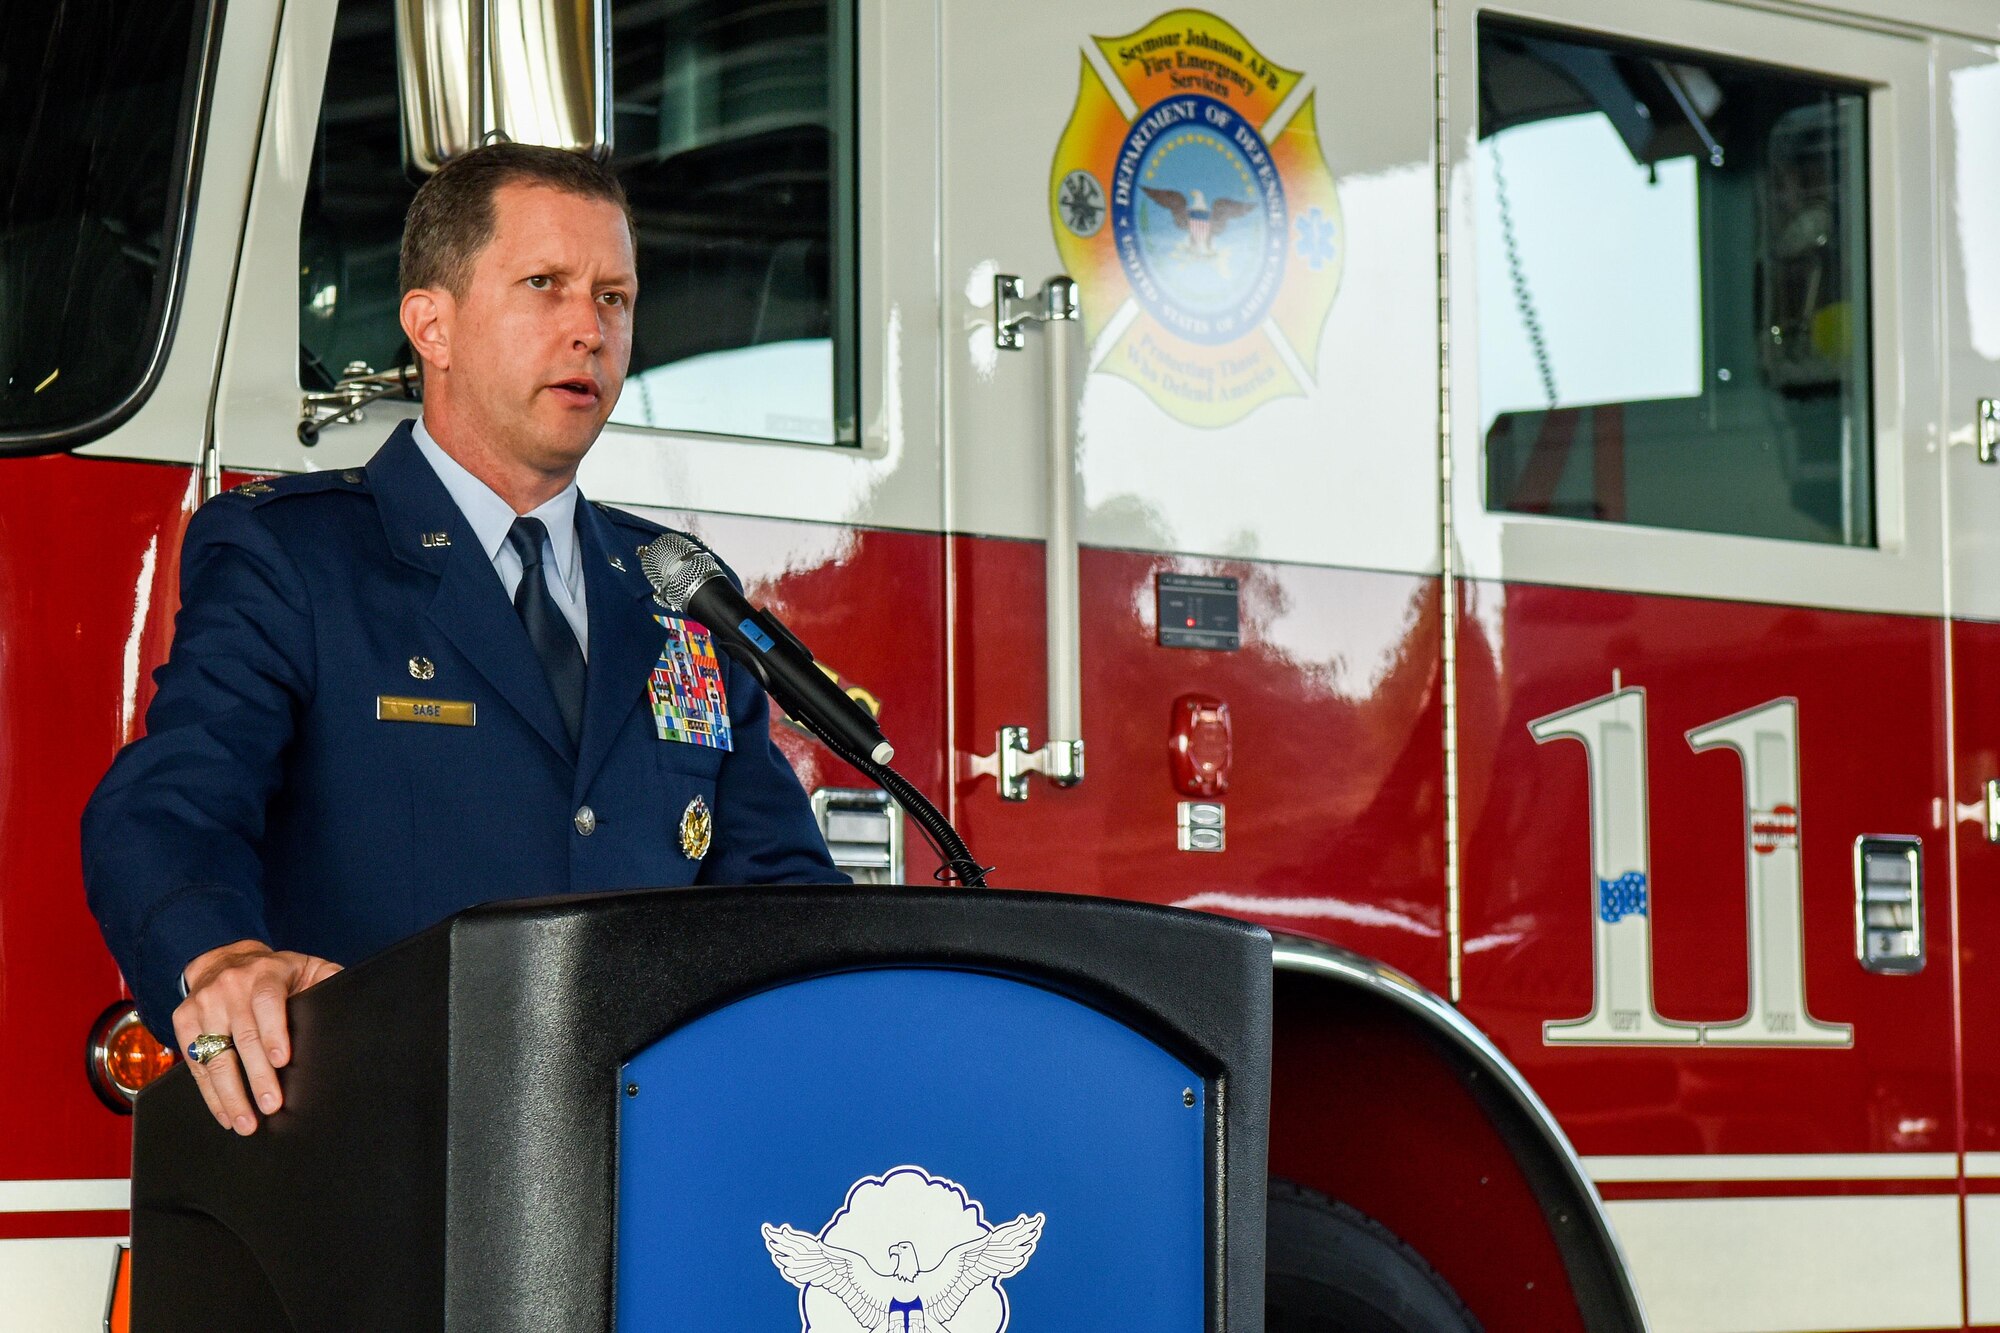 Col. Christopher Sage, 4th Fighter Wing commander, speaks during a 9/11 Remembrance ceremony, Sept. 11, 2016, at Seymour Johnson Air Force Base, North Carolina. Sage said the reason he is standing here today is because of the moment when the second plane hit the south tower and he put his plans to separate from the Air Force on the shelf. (U.S. Air Force photo by Airman Shawna L. Keyes)